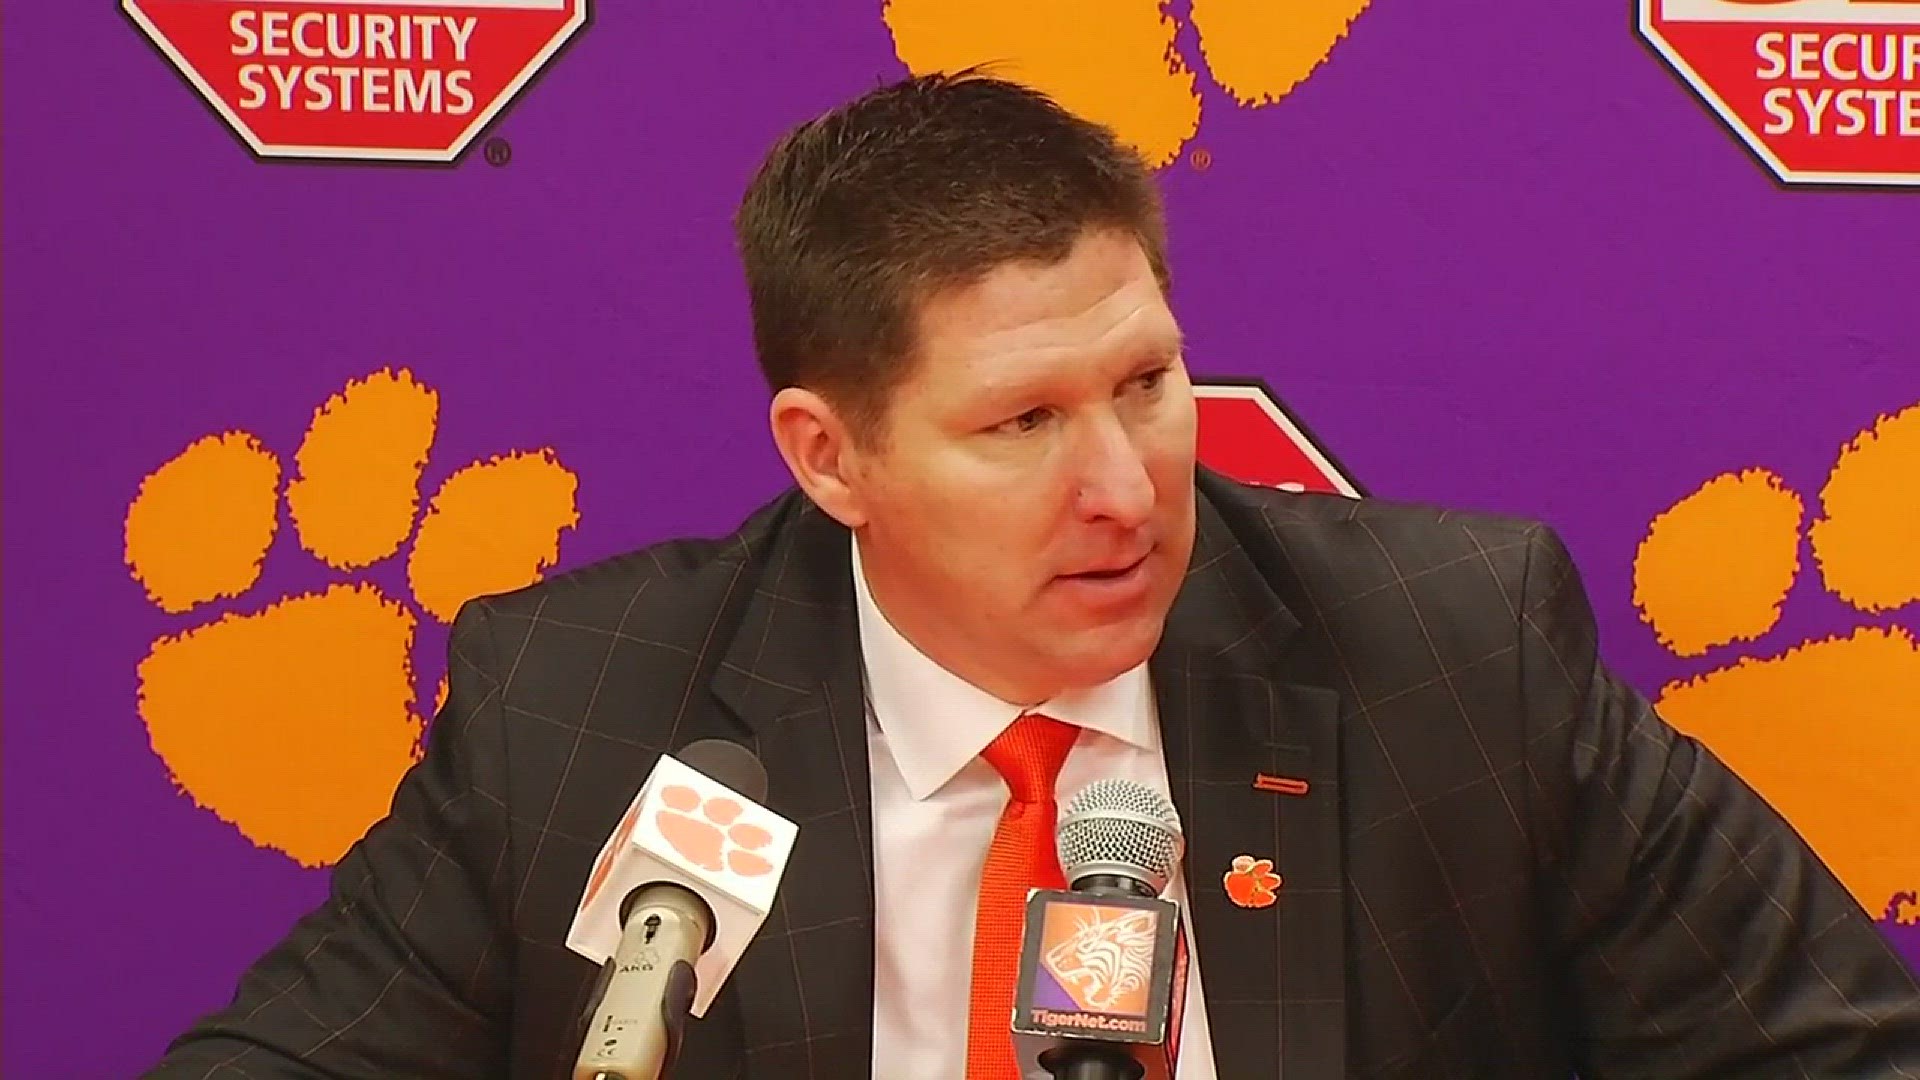 Clemson head coach Brad Brownell talks about his team's 82-78 victory over North Carolina. The Coach mentioned how his team competed and also praised Lower Richland guard and Tiger freshman Clyde Trapp who came off the bench and scored six points and play